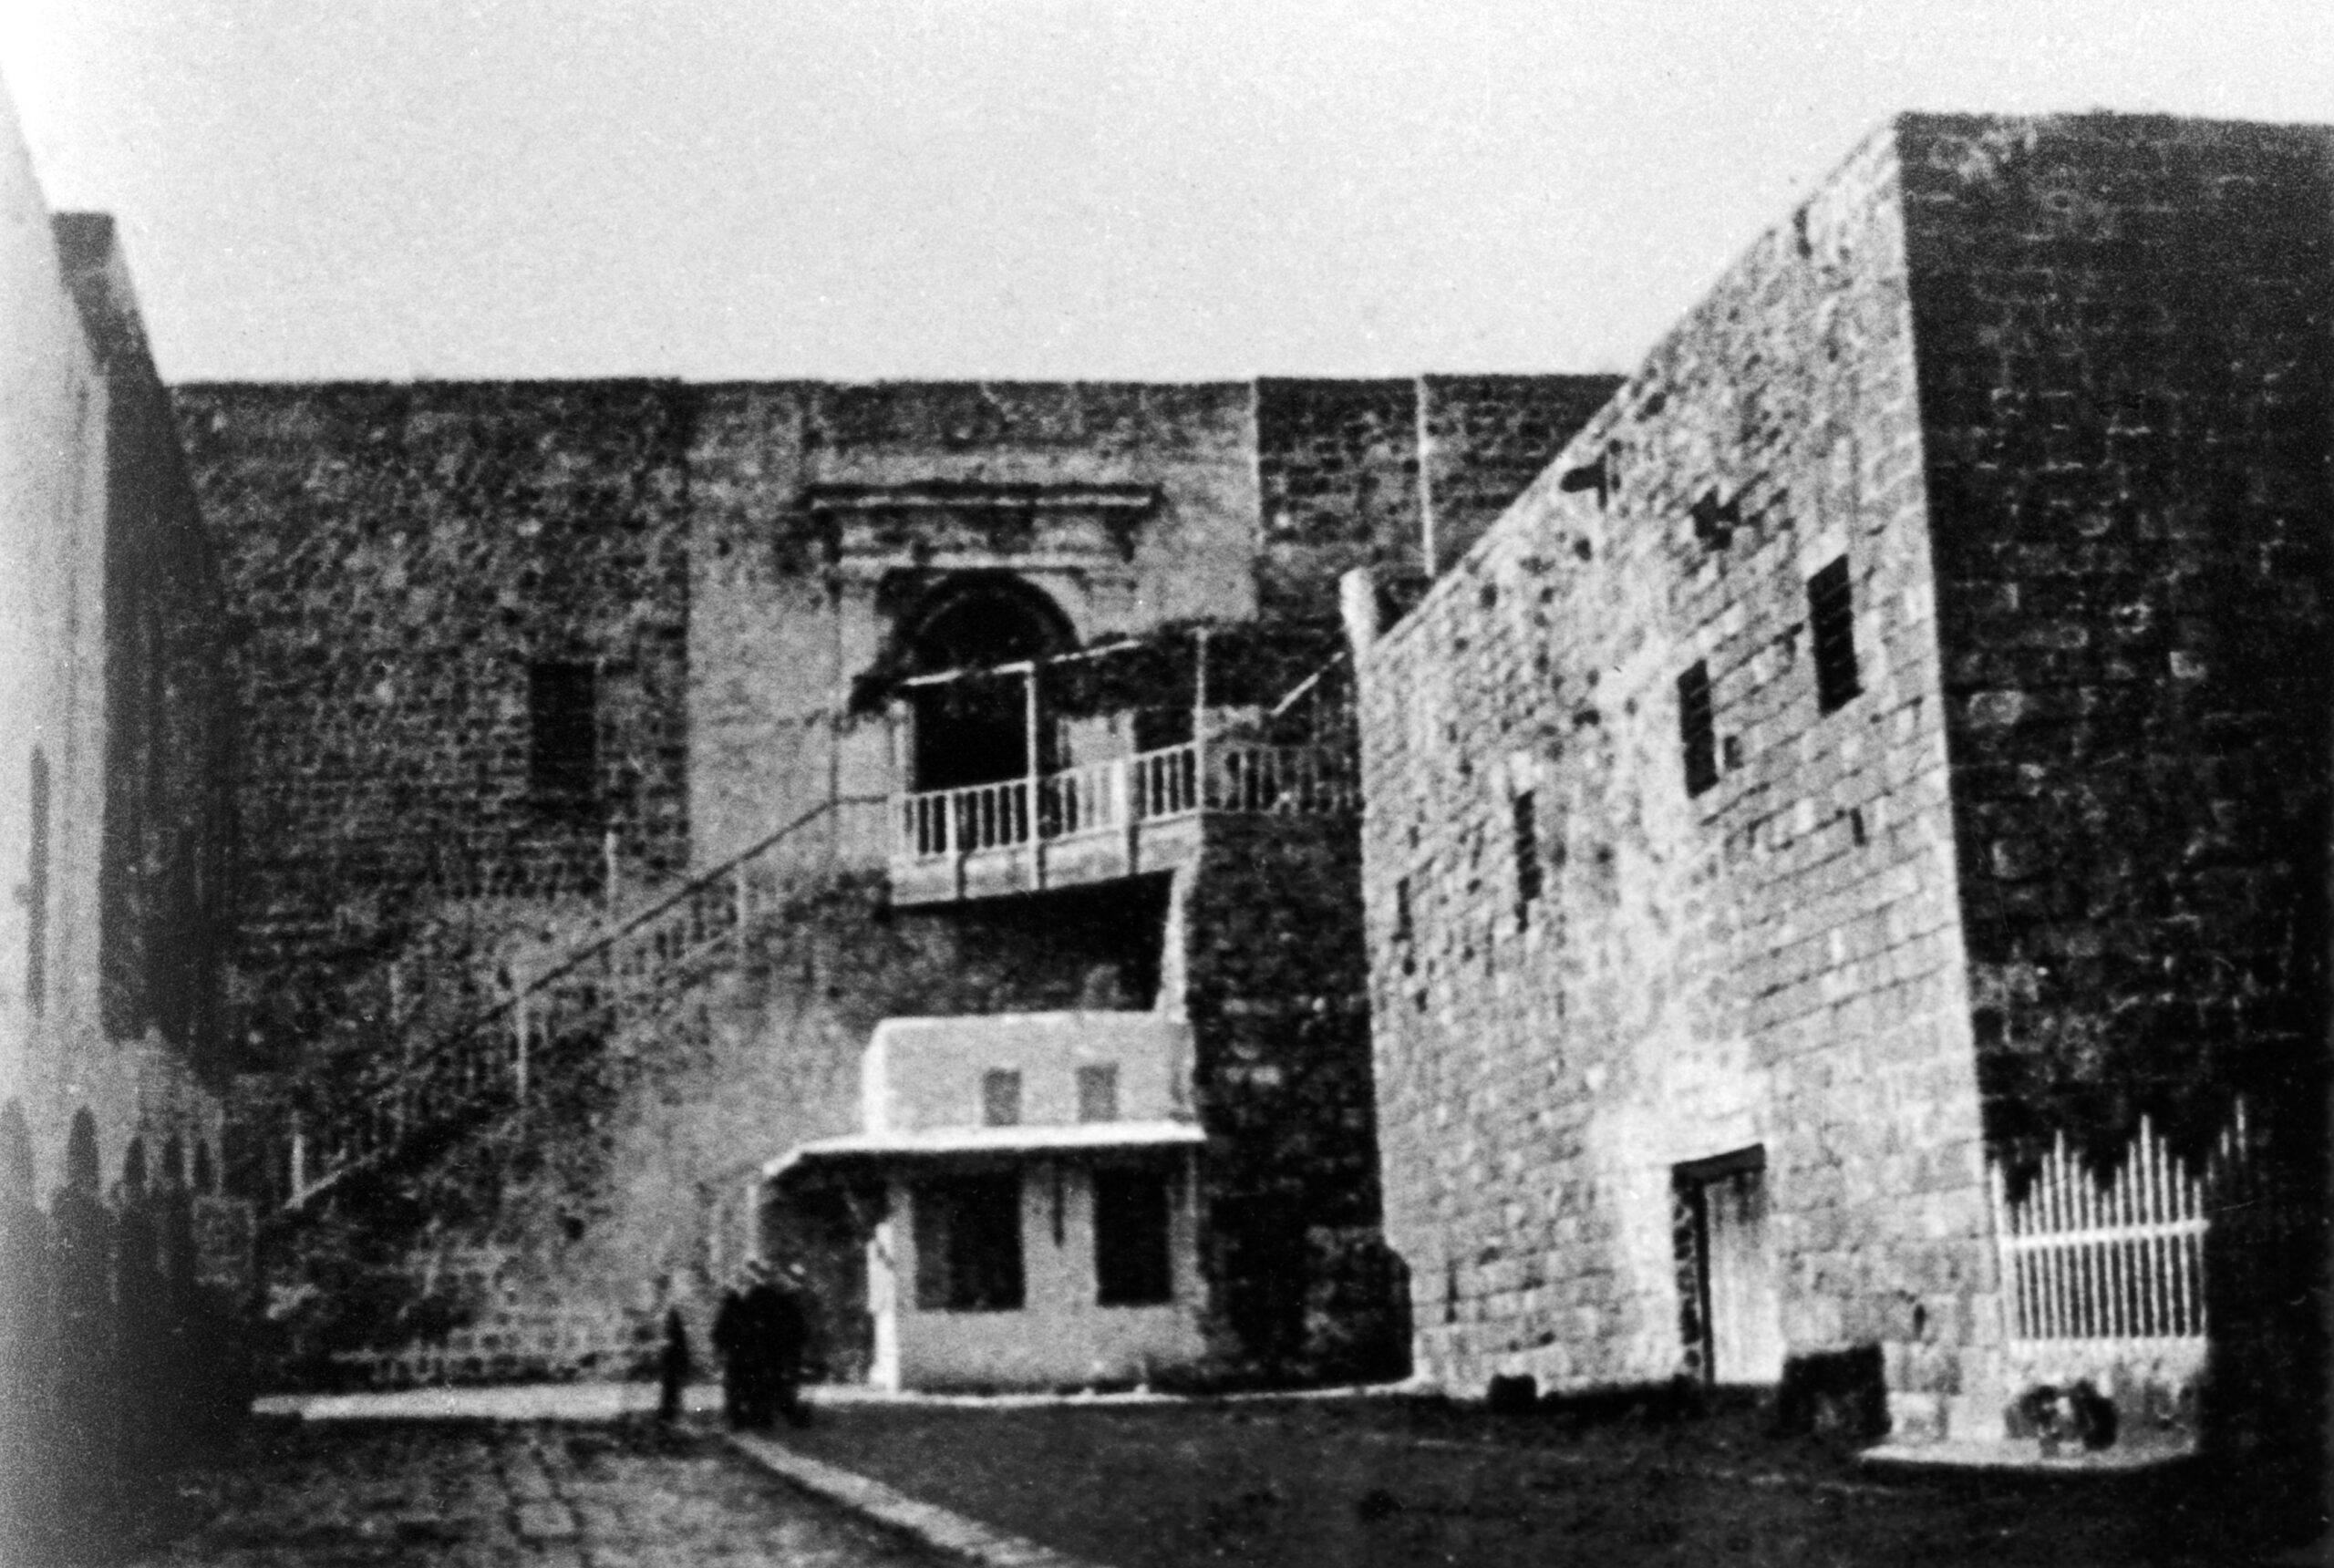 Stairway leading to the ‘Akká prison within the citadel, c. 1901